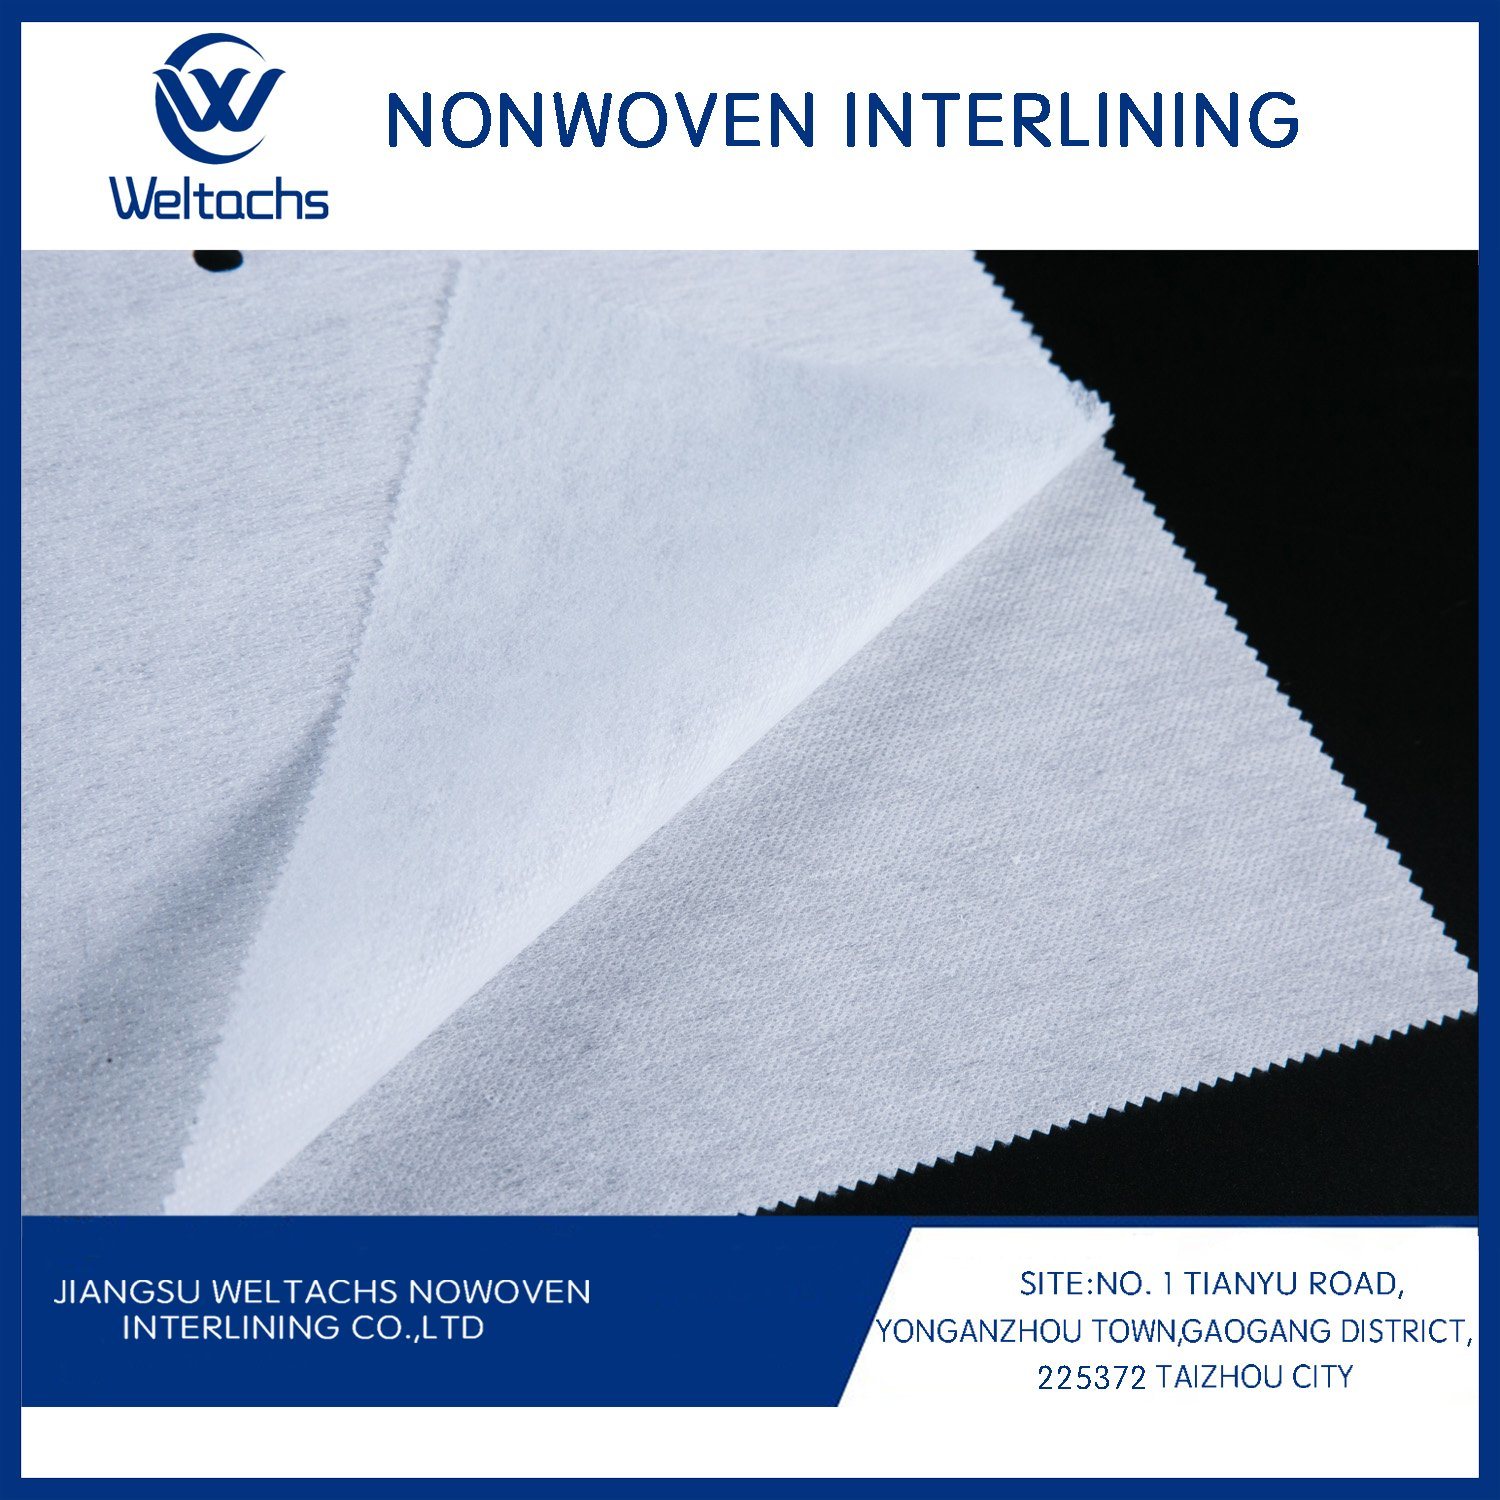 Non Woven Fusing Interlining Gum Stay Chemical Bond Garment Fusible Interlining Hf Quality